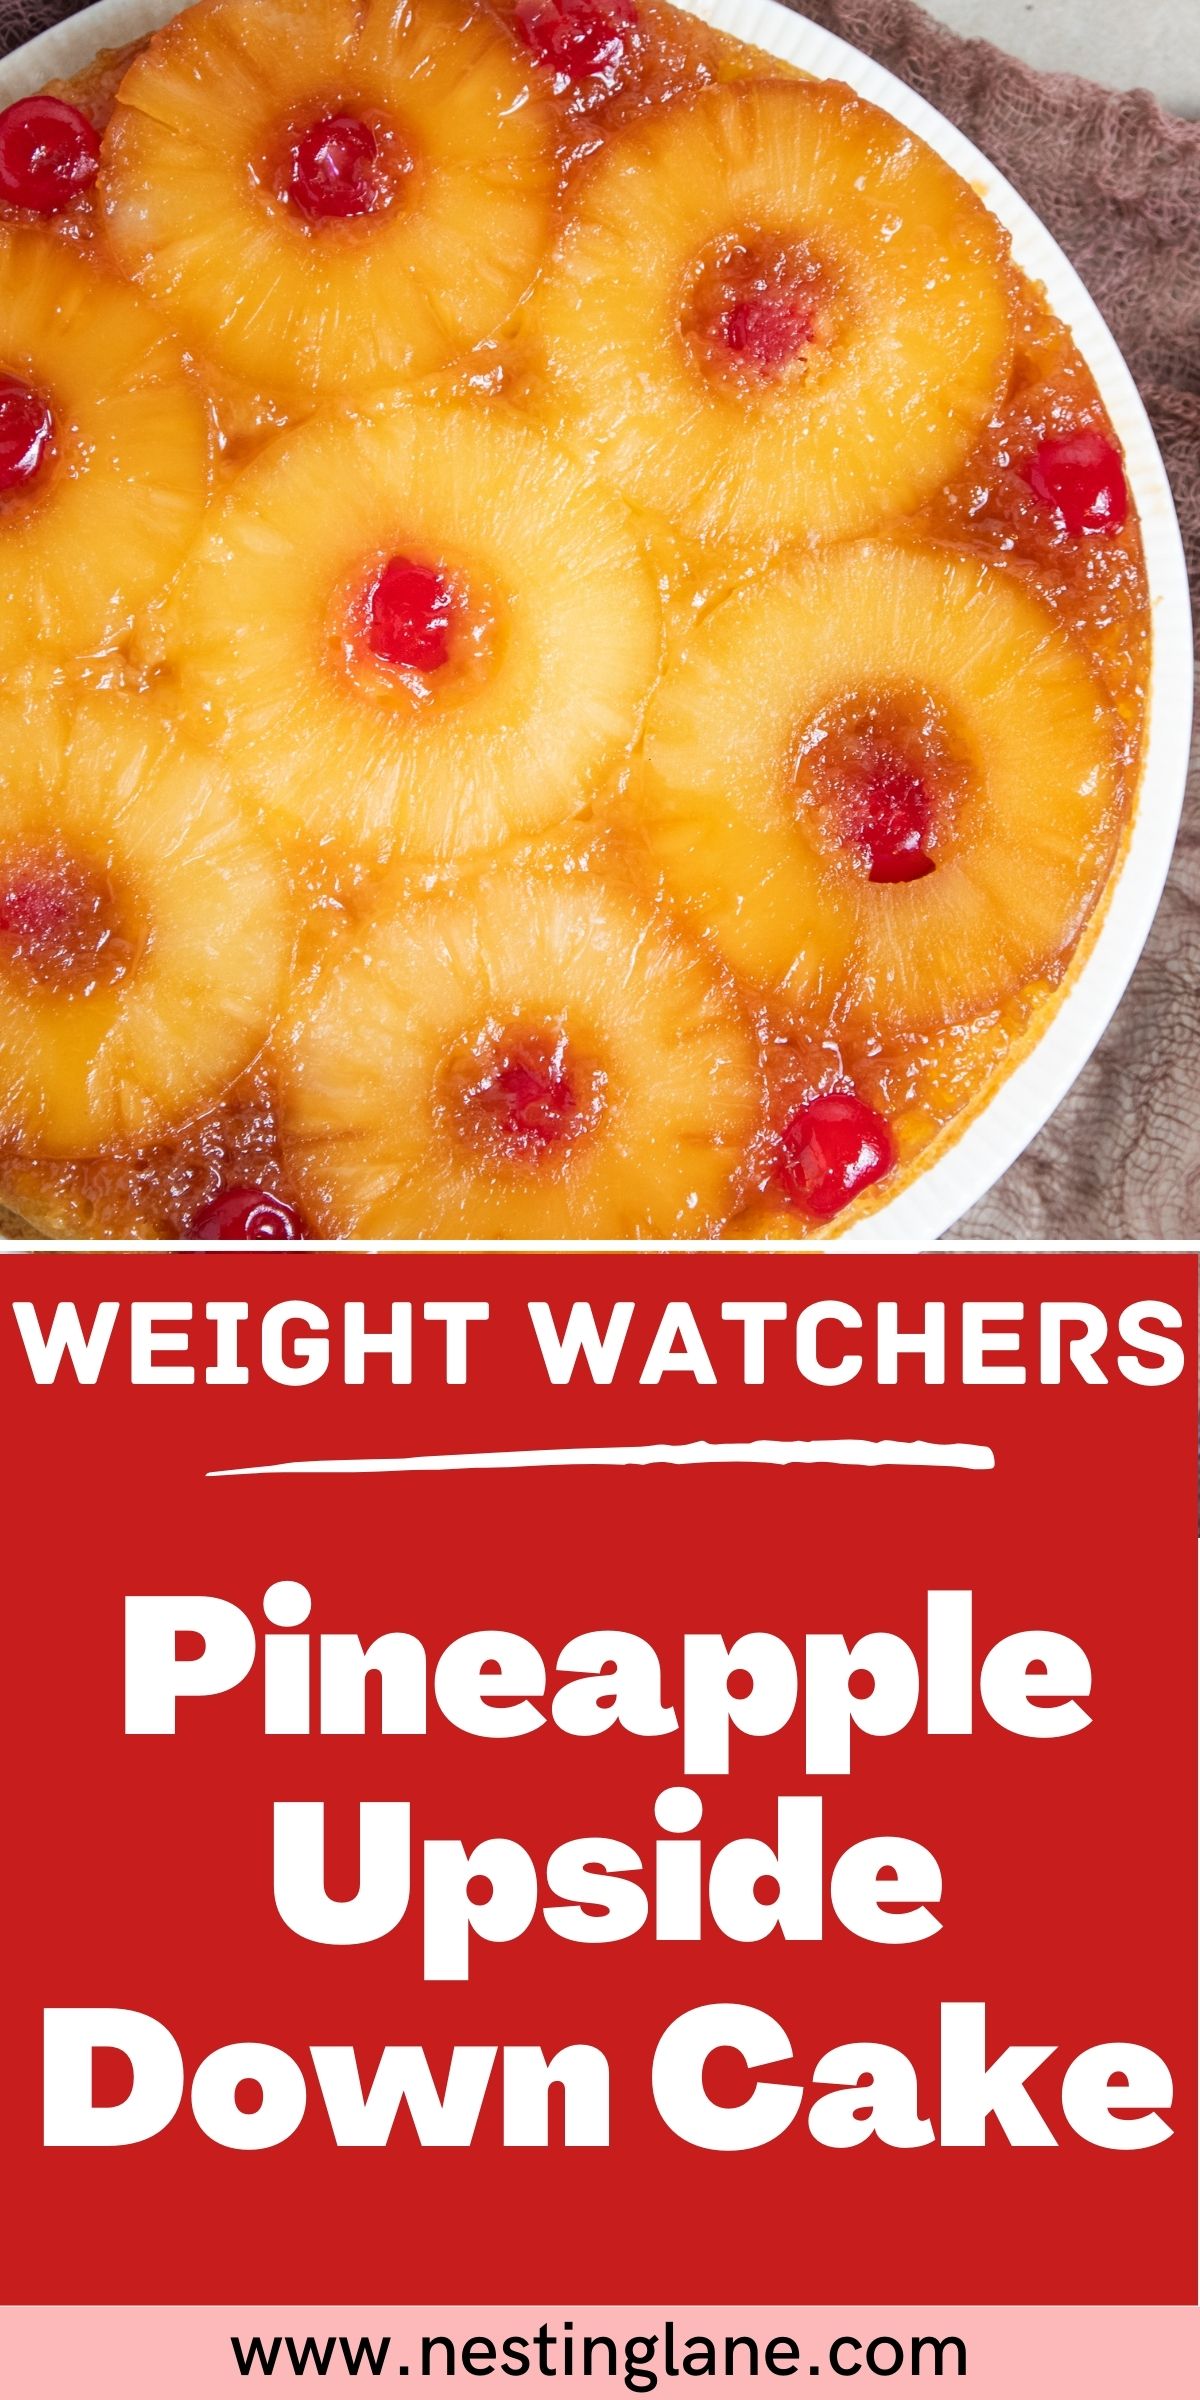 Graphic for Pinterest of Easy Weight Watchers Pineapple Upside Down Cake Recipe.